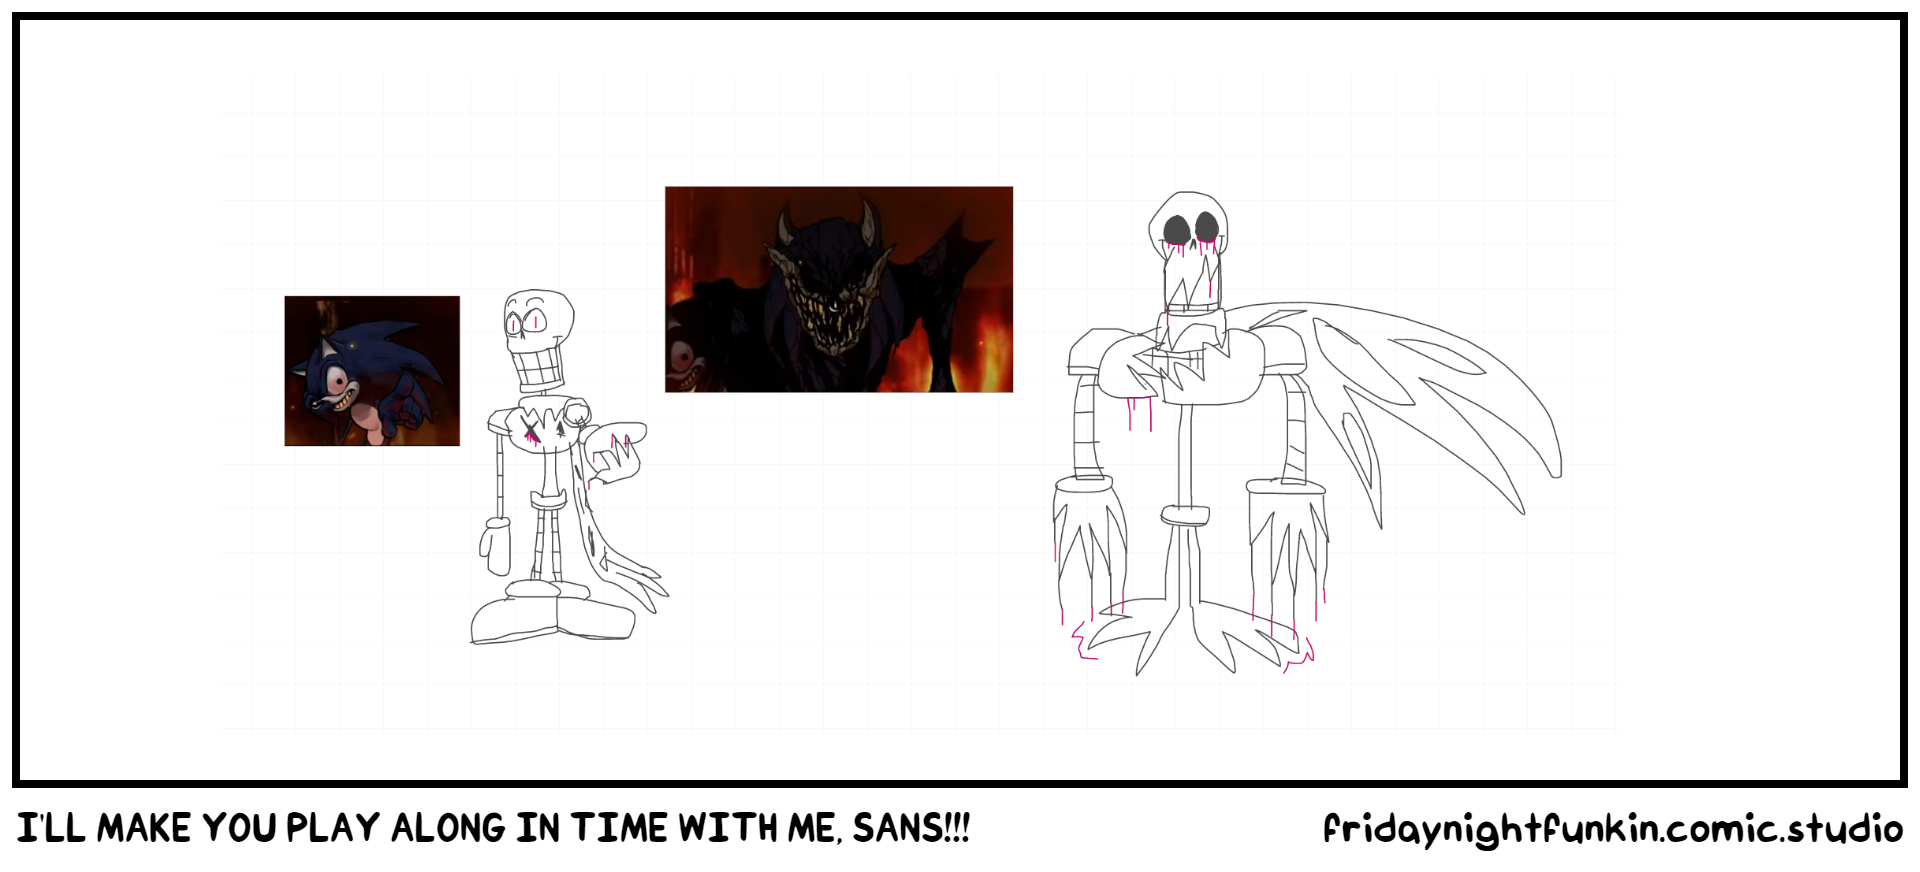 I'LL MAKE YOU PLAY ALONG IN TIME WITH ME, SANS!!!